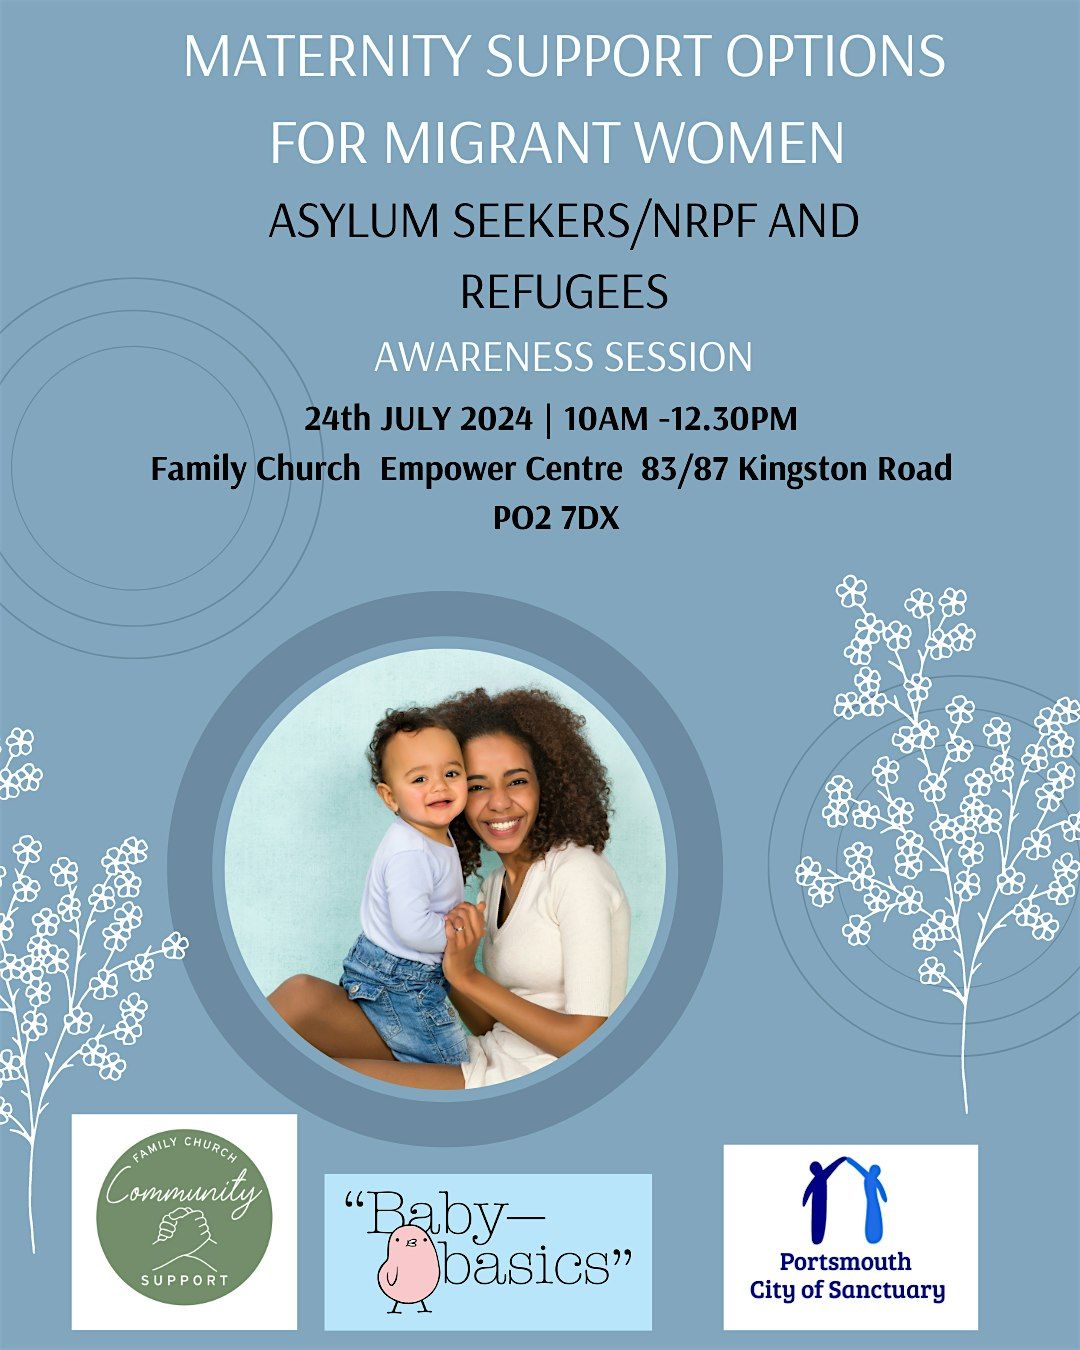 Maternity Support Options for Migrant Women (Asylum Seekers\/NRPF\/Refugees)